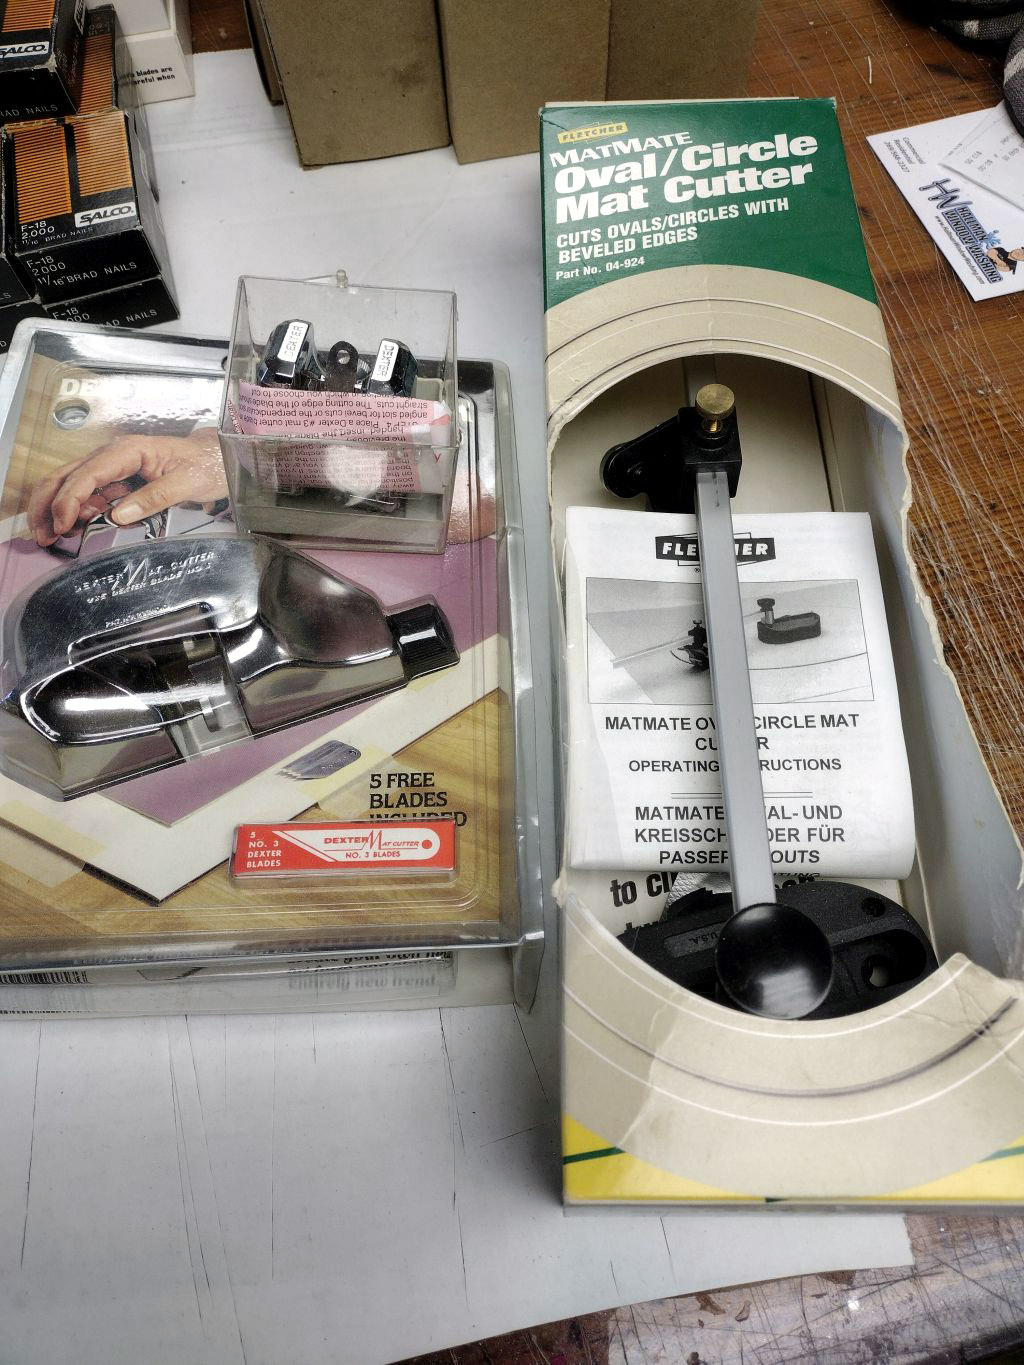 Equipment Lot: Jyden Chopper w/ Measuring Table & Picture Framing Supply & Tool Lot (Used) Item # UE-102323C